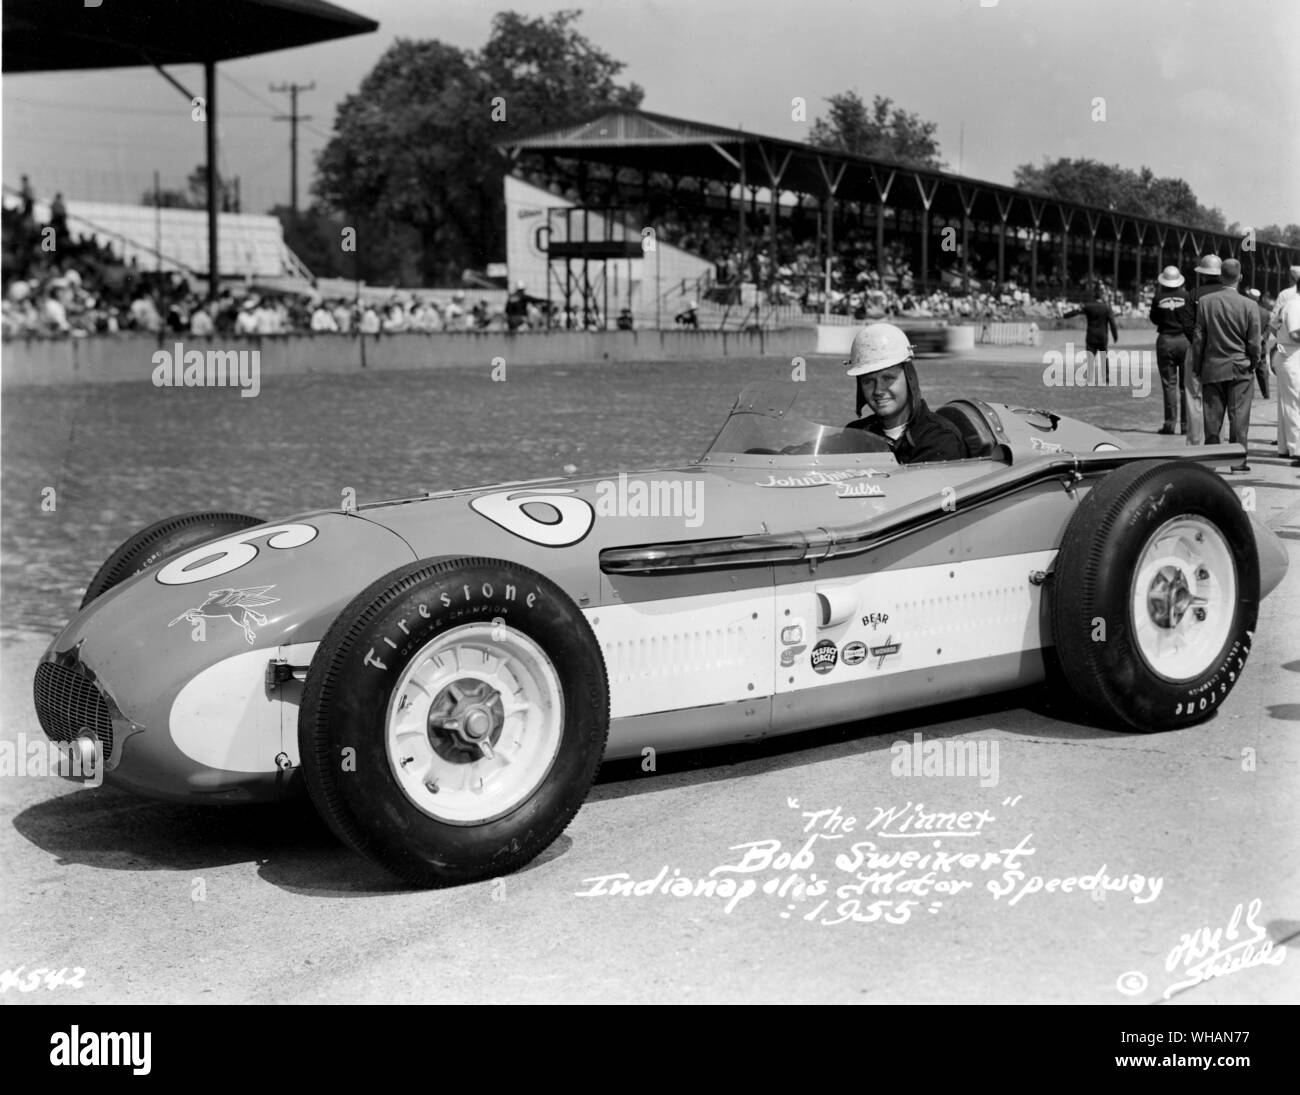 Bob Sweikert Indianapolis Motor Speedway 1955 Banque D'Images